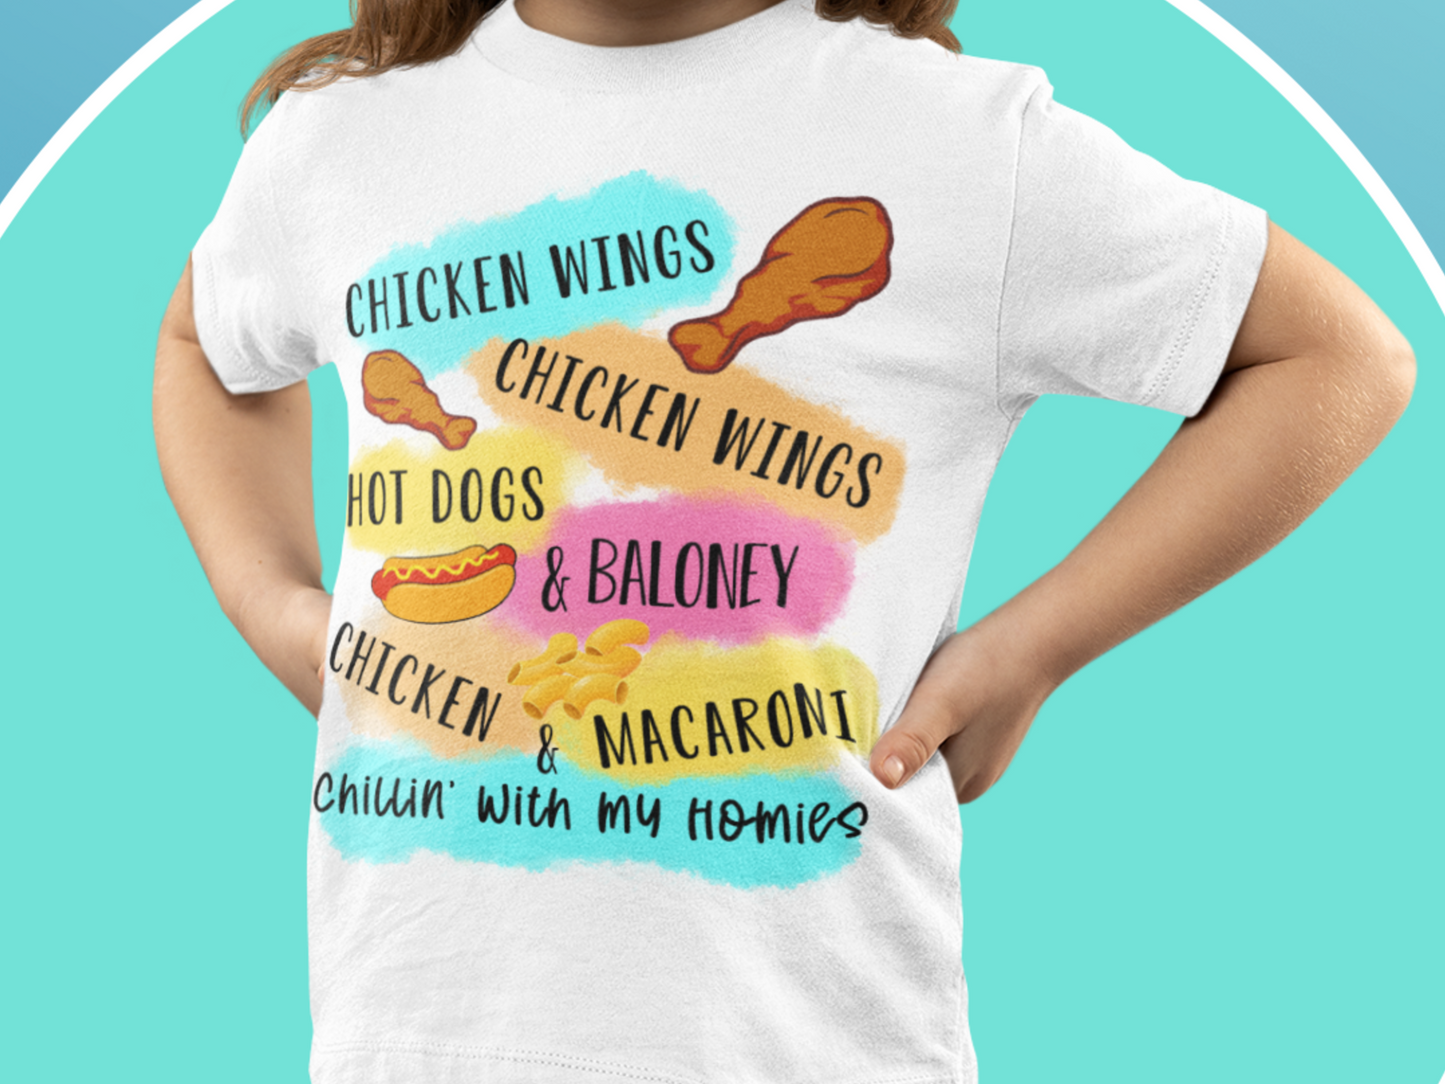 Chicken Wing Hot Dog N Baloney Chicken And Macaroni Chillin With My Homies Kid's T-shirt